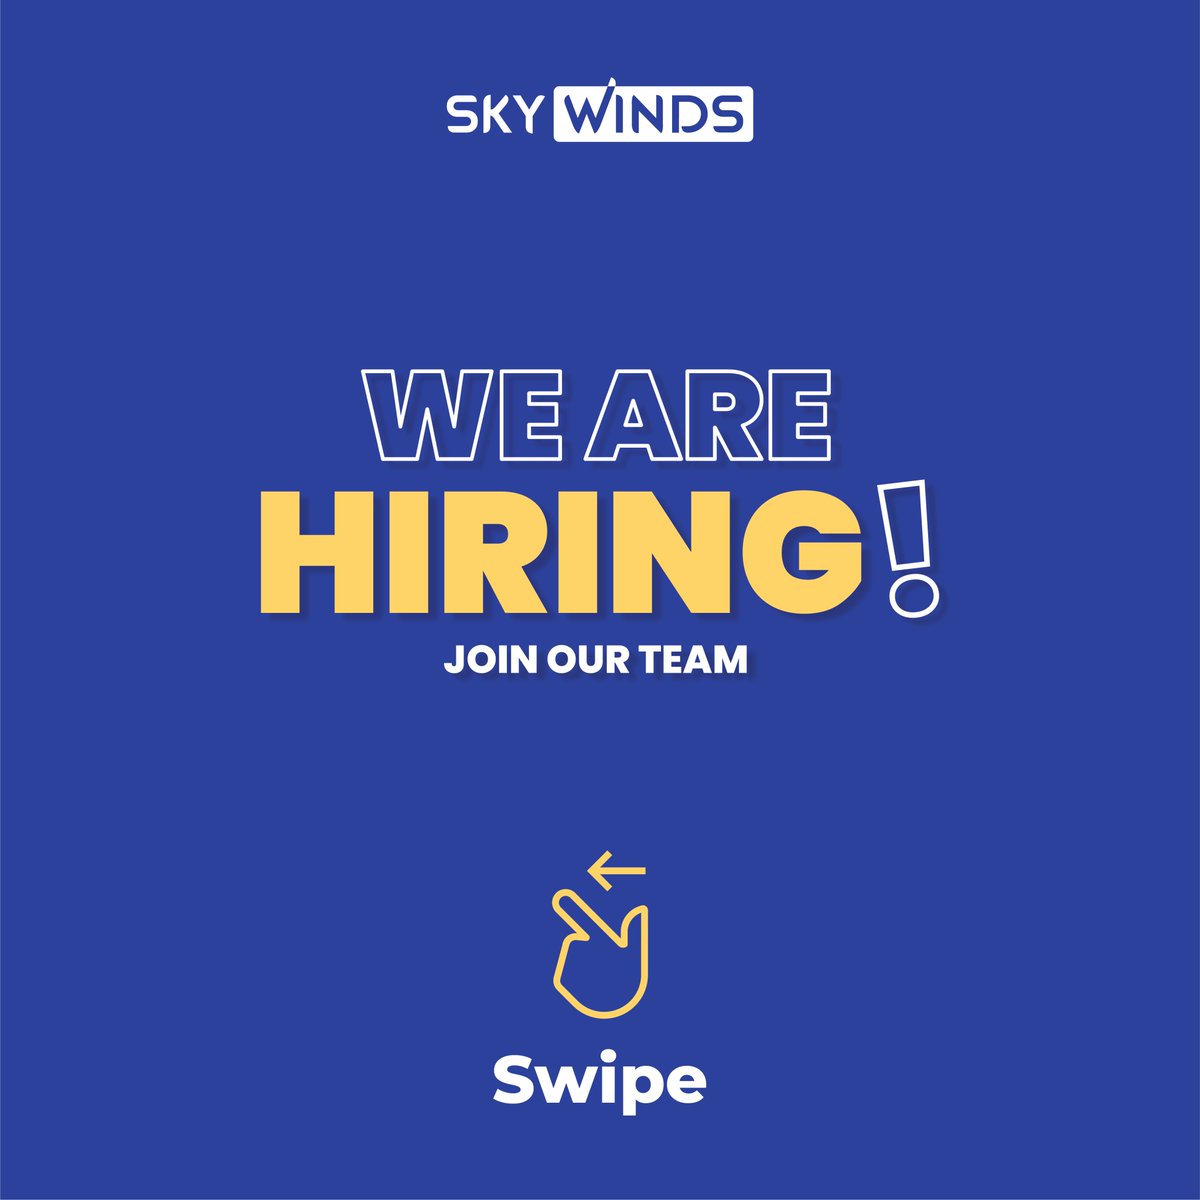 🌟 Join our amazing team as a '.NET Core + Angular Developer' and unlock your potential! ✨🚀

If you're looking for an exciting opportunity, apply now at hr@skywinds.tech! ⚡️💻

#skywindssolutions #sspl #india #jointheteam #codingpassion #dreamjob #techopportunity #findapro